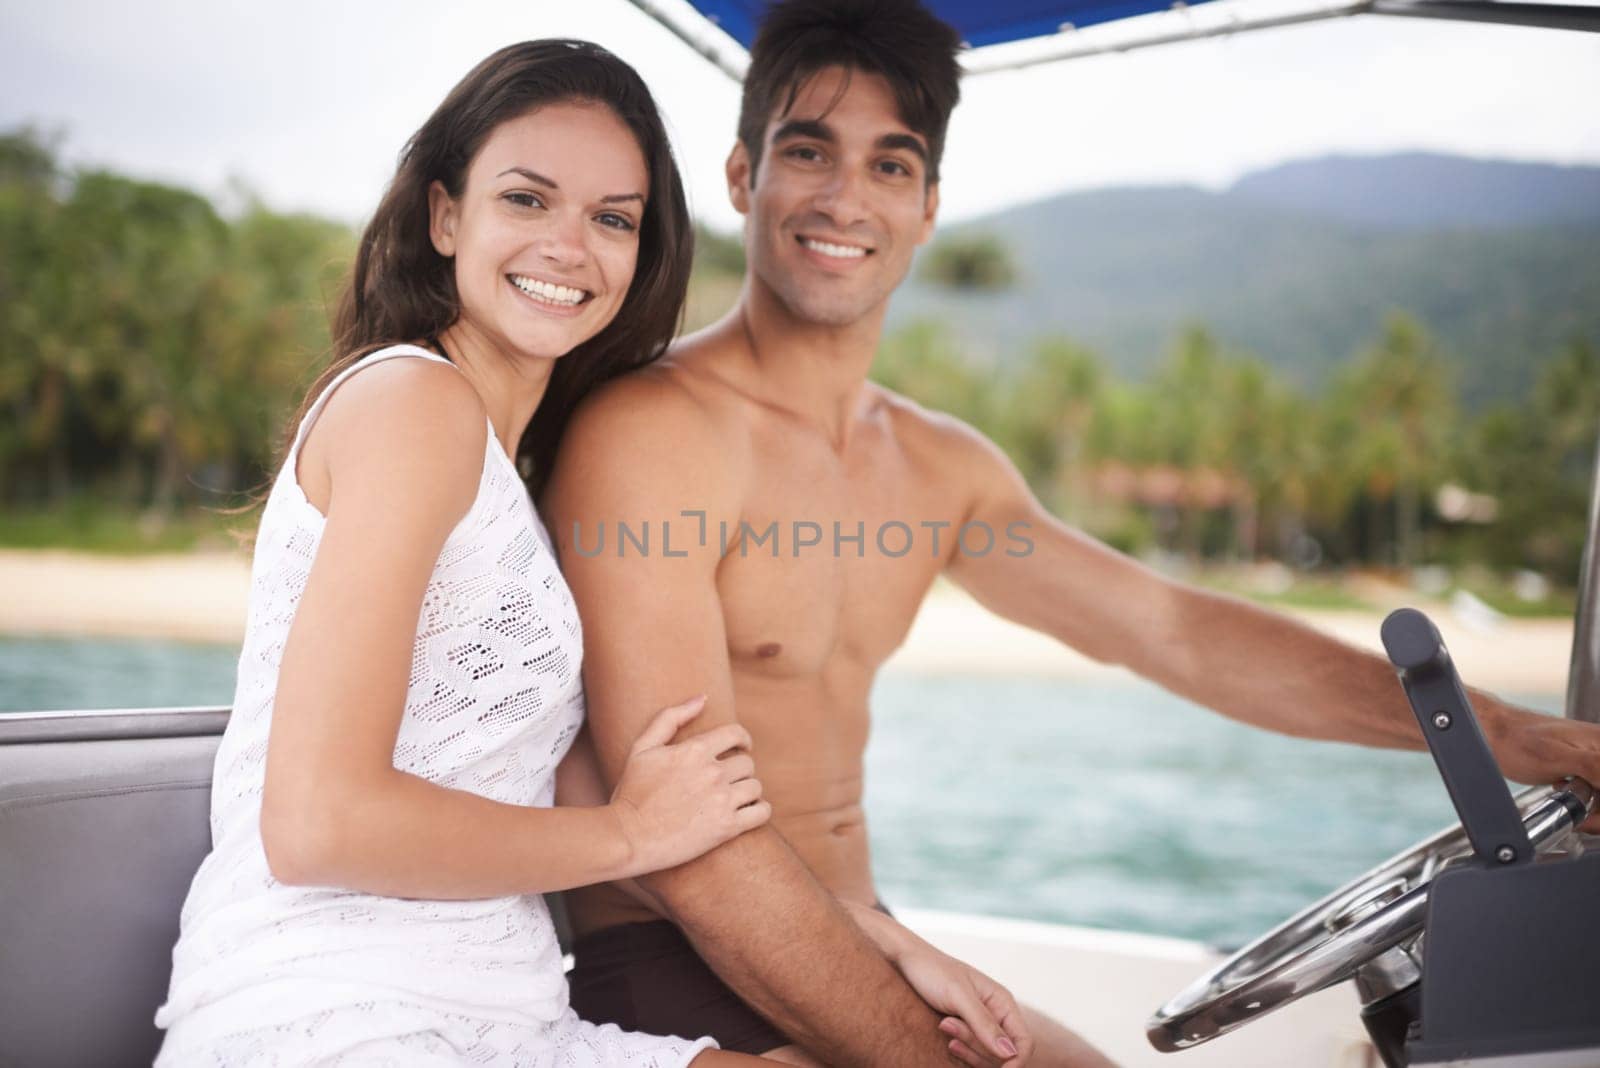 Couple, portrait and driving boat on ocean holiday or explore sea on vacation adventure, travel or steering wheel. Man, woman and happy in Hawaii or outdoor journey or coast, transportation or nature.